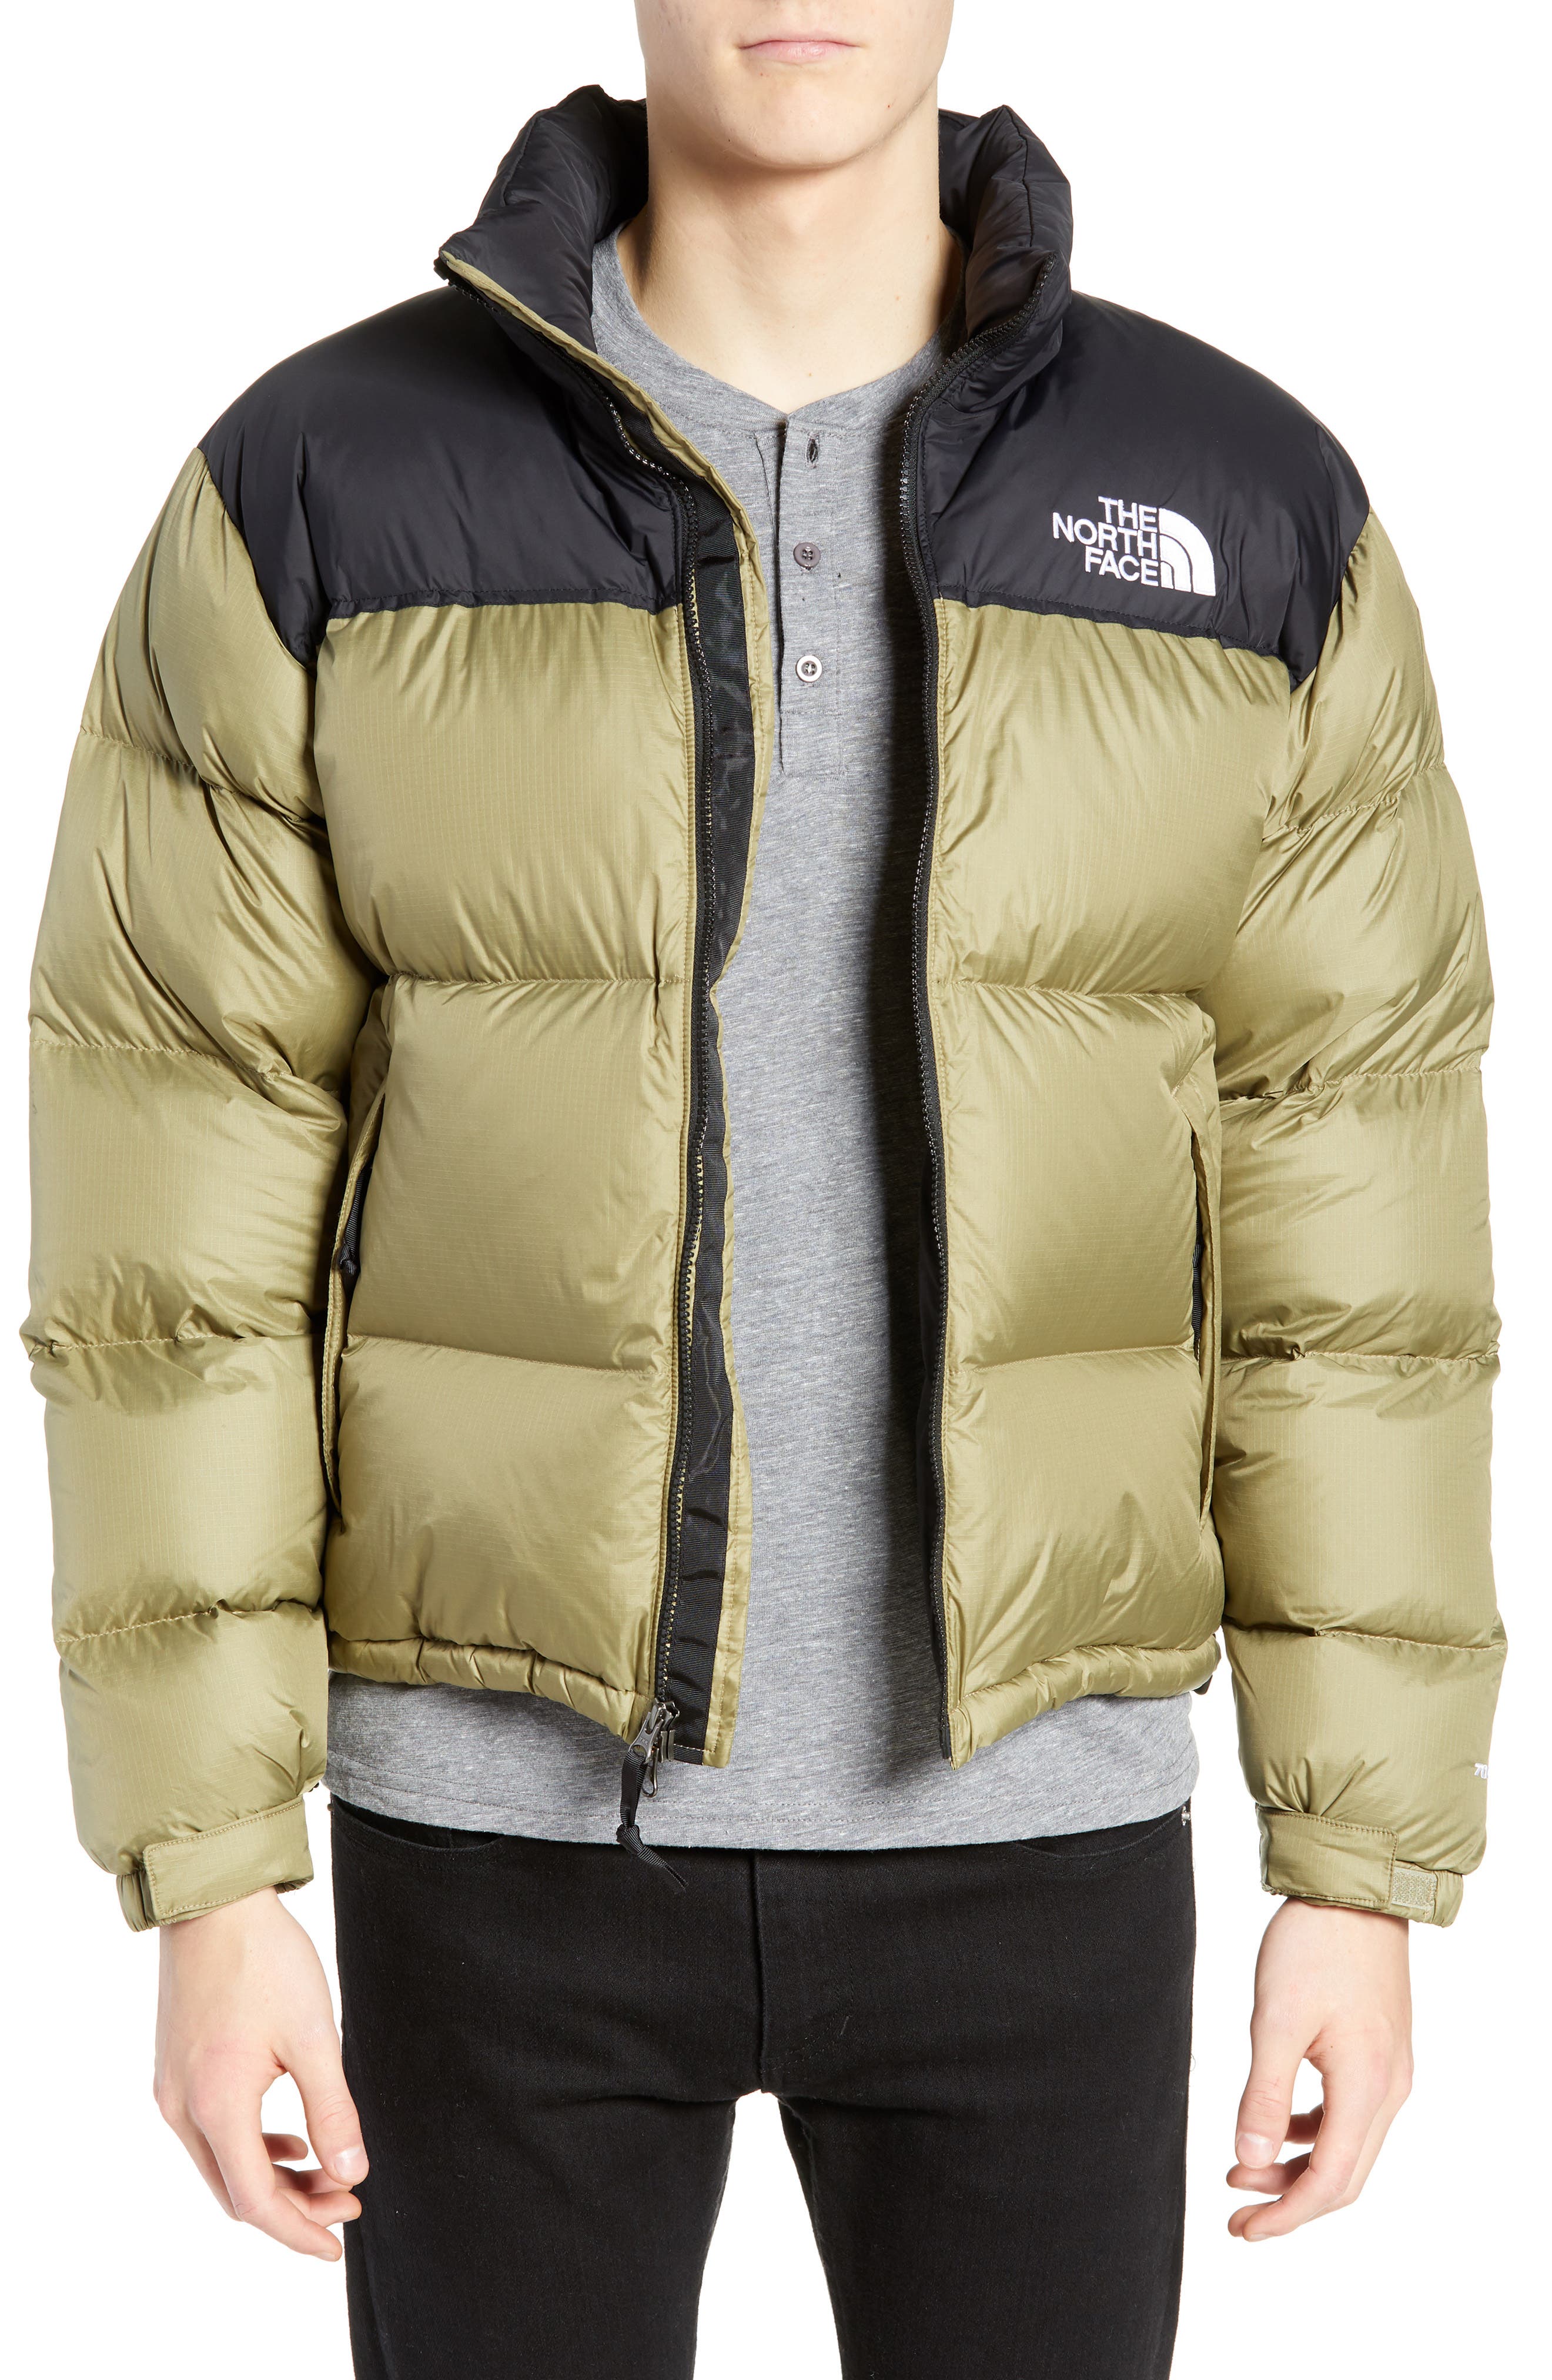 Teens david the north face nuptse 1996 down jacket green bridesmaid for tall, Tommy hilfiger elbow patch blazer, polo ralph lauren underwear t shirt. 